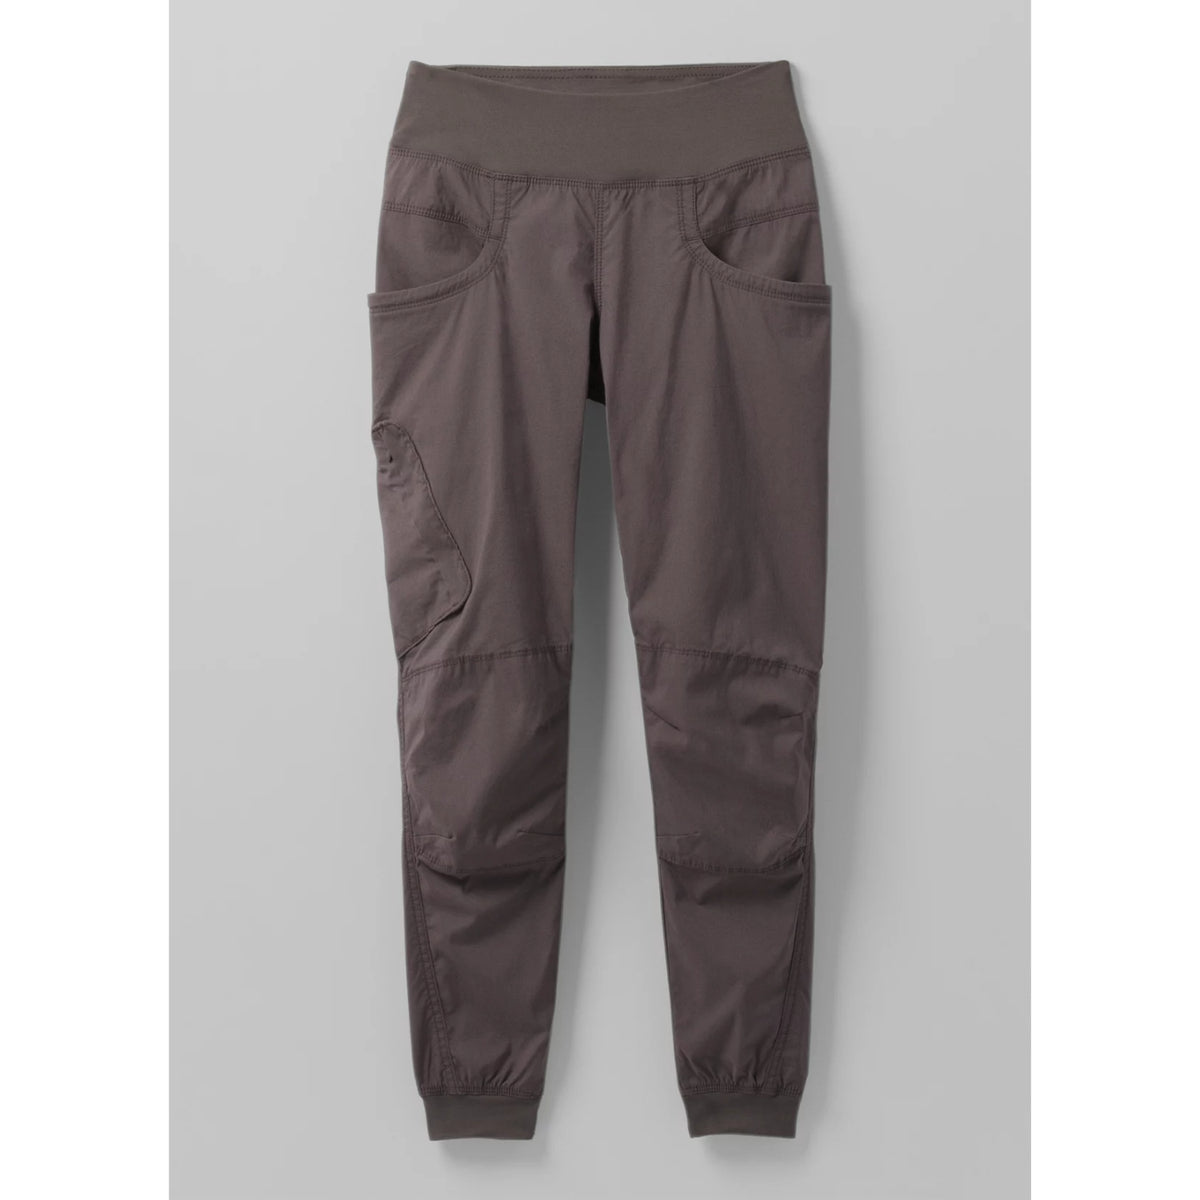 Prana Kanab Pant Womens in granite colour showing front